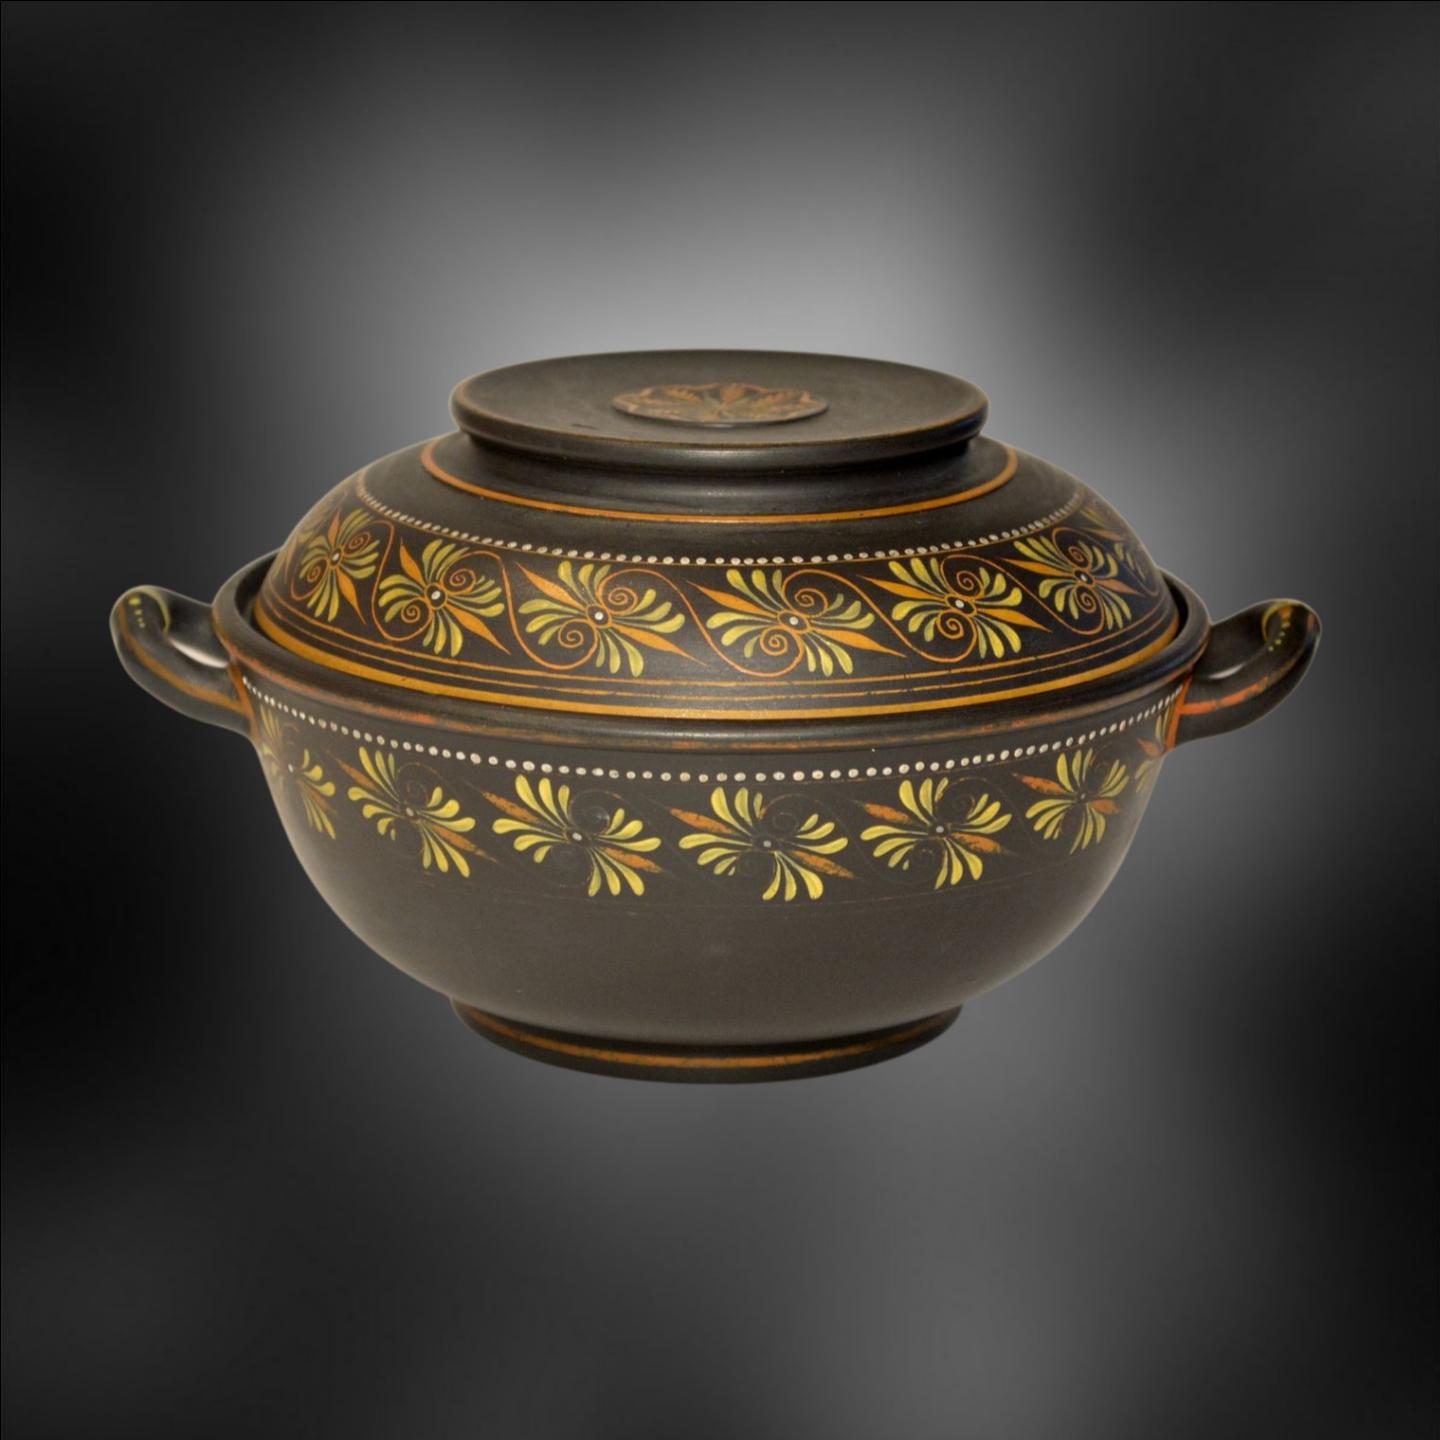 In black basalt, decorated with encaustic painting.

An écuelle is a French word that refers to a shallow dish or bowl, typically made of metal or ceramic, and used for serving food. Écuelle is also the French word for a small, shallow saucer used